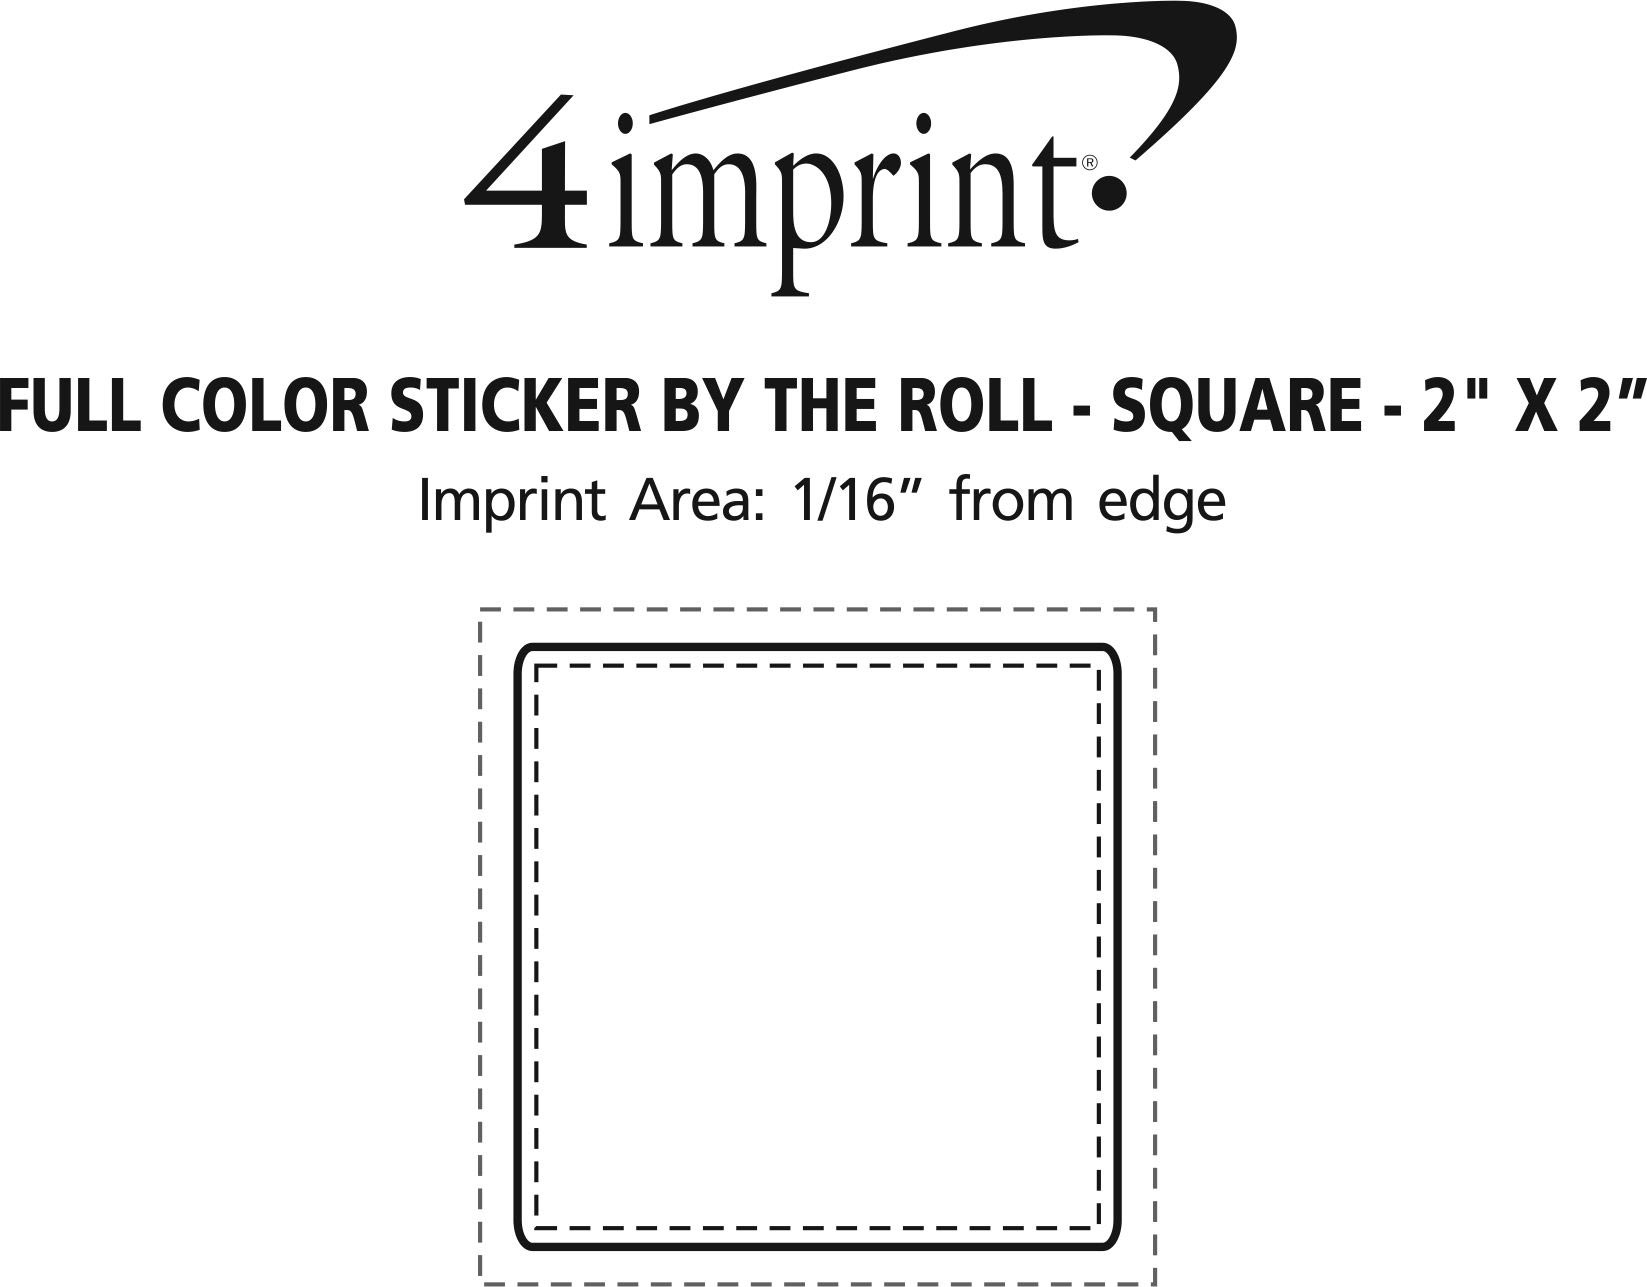 Imprint Area of Full Color Sticker by the Roll - Square - 2" x 2"